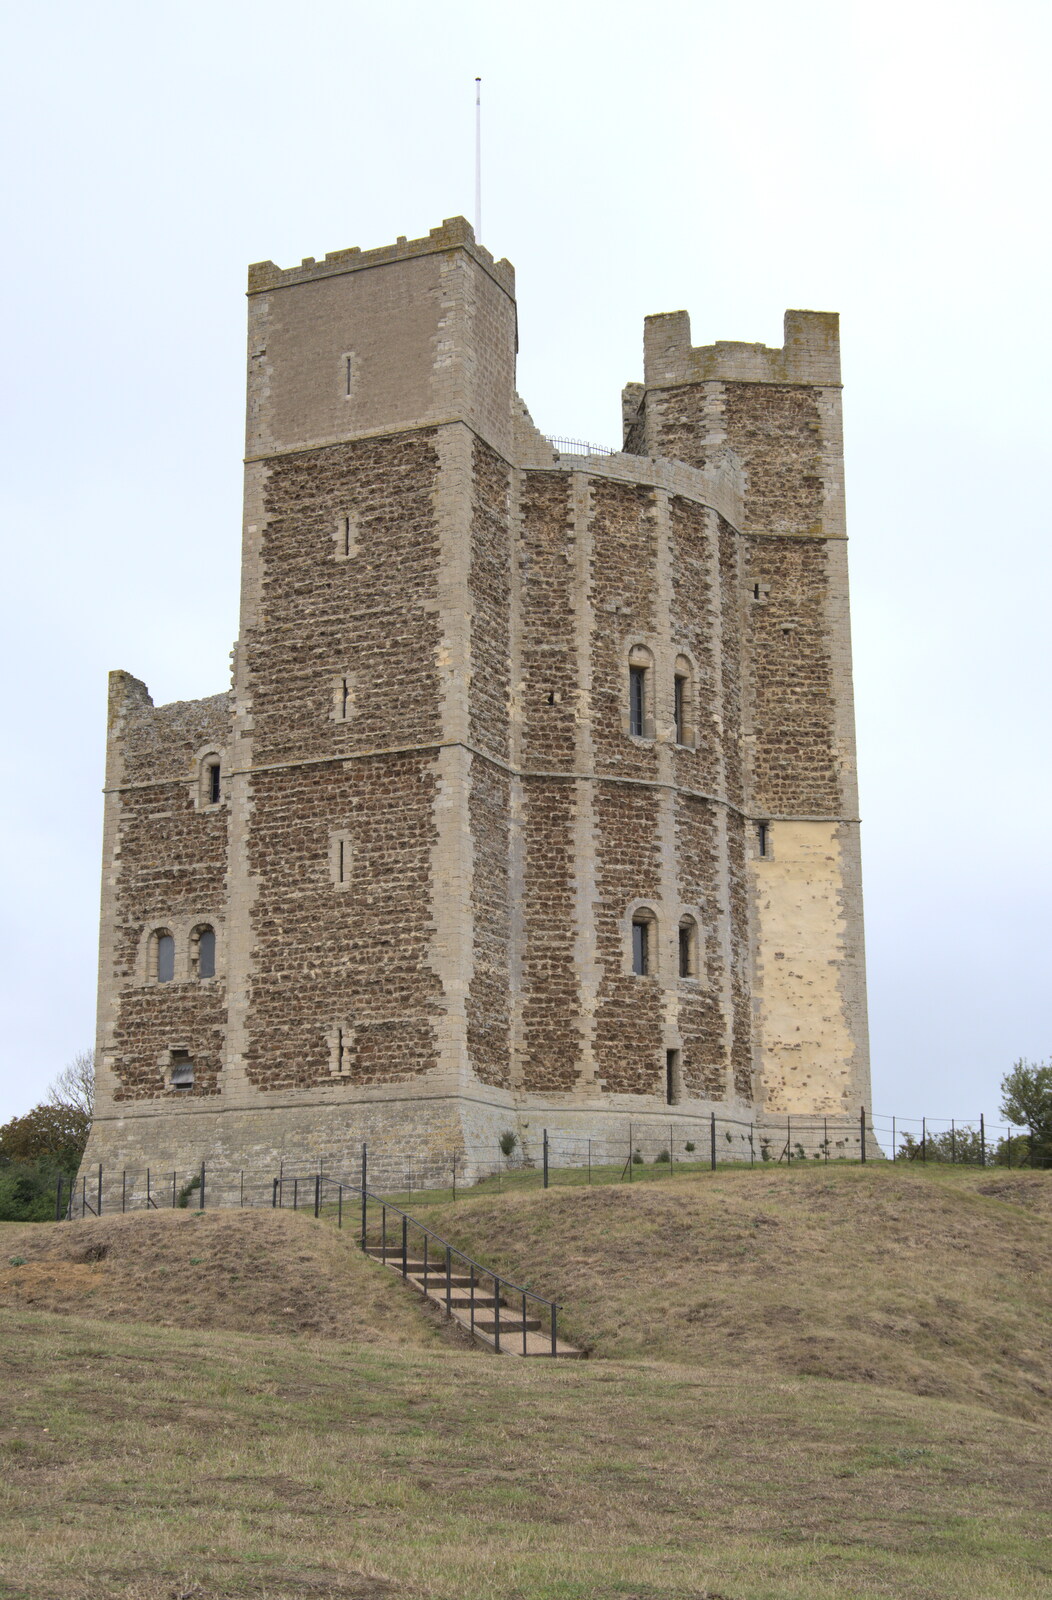 A rare photo of Orford Castle with no-one in it from A Trip to Orford, Suffolk - 29th August 2020